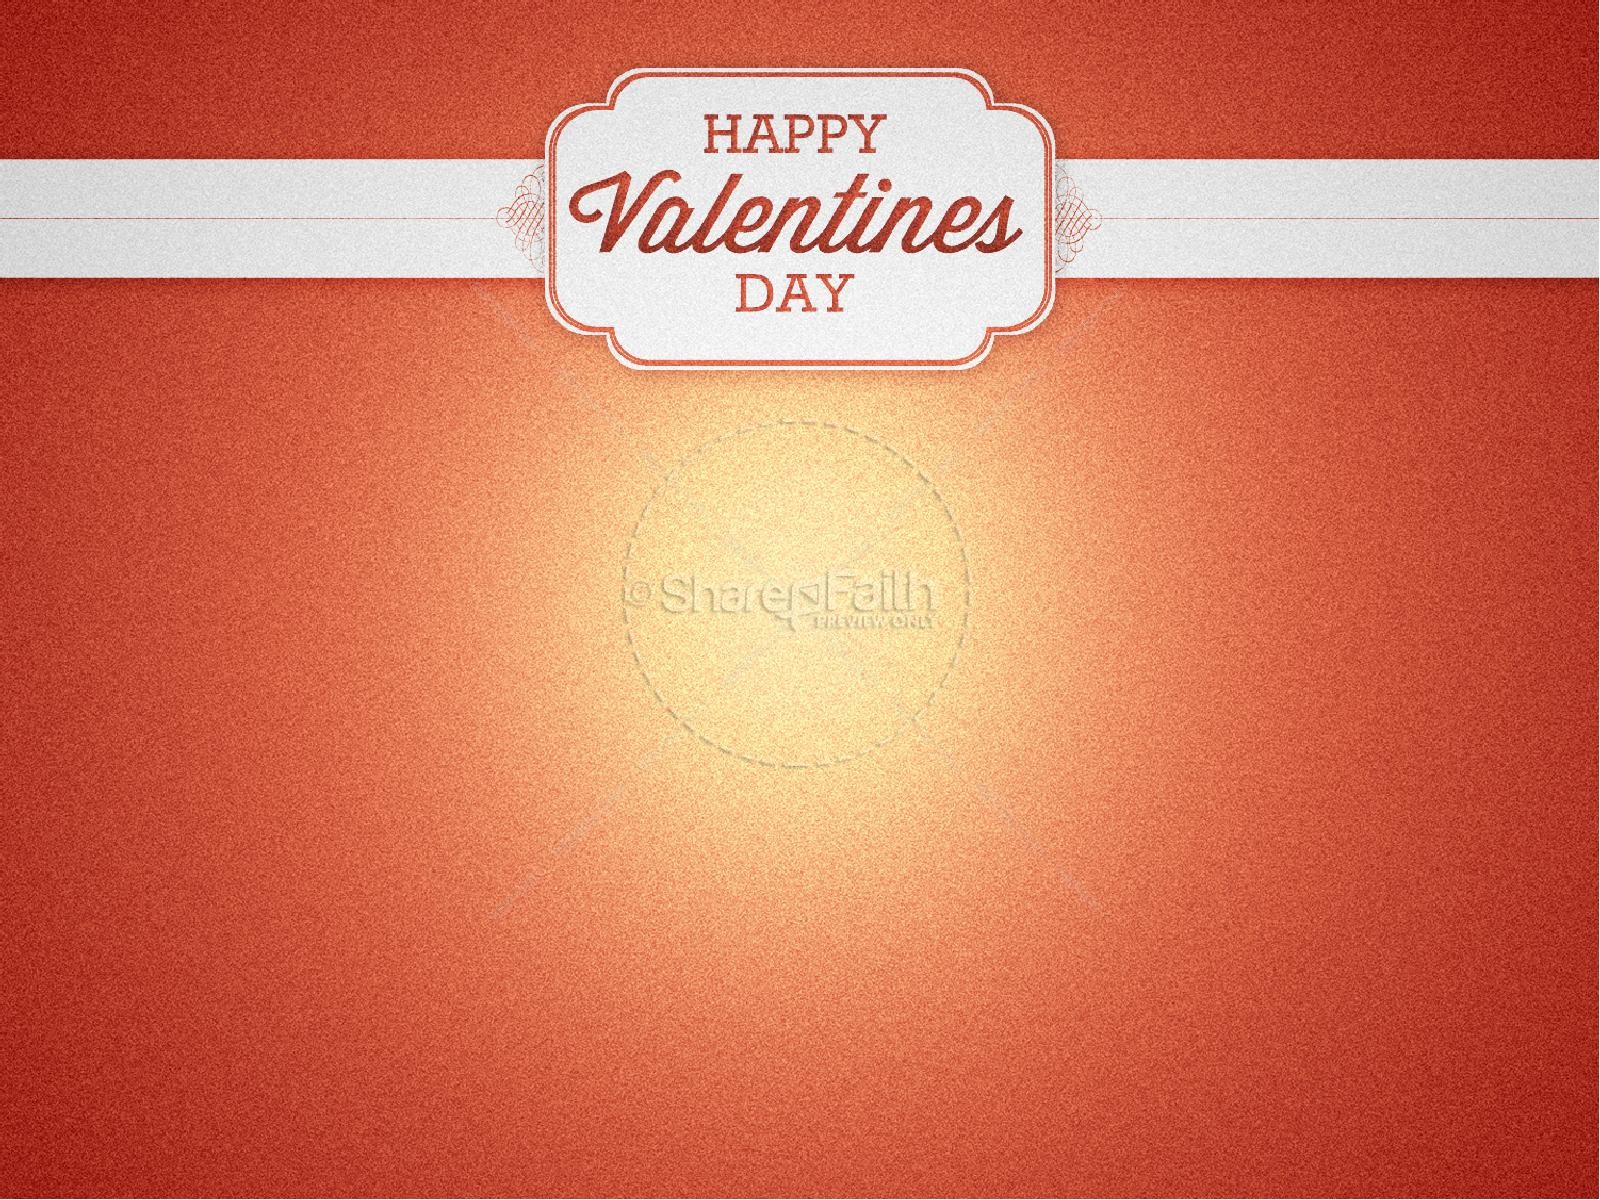 Happy Valentine's Day Christian PowerPoint Thumbnail 2